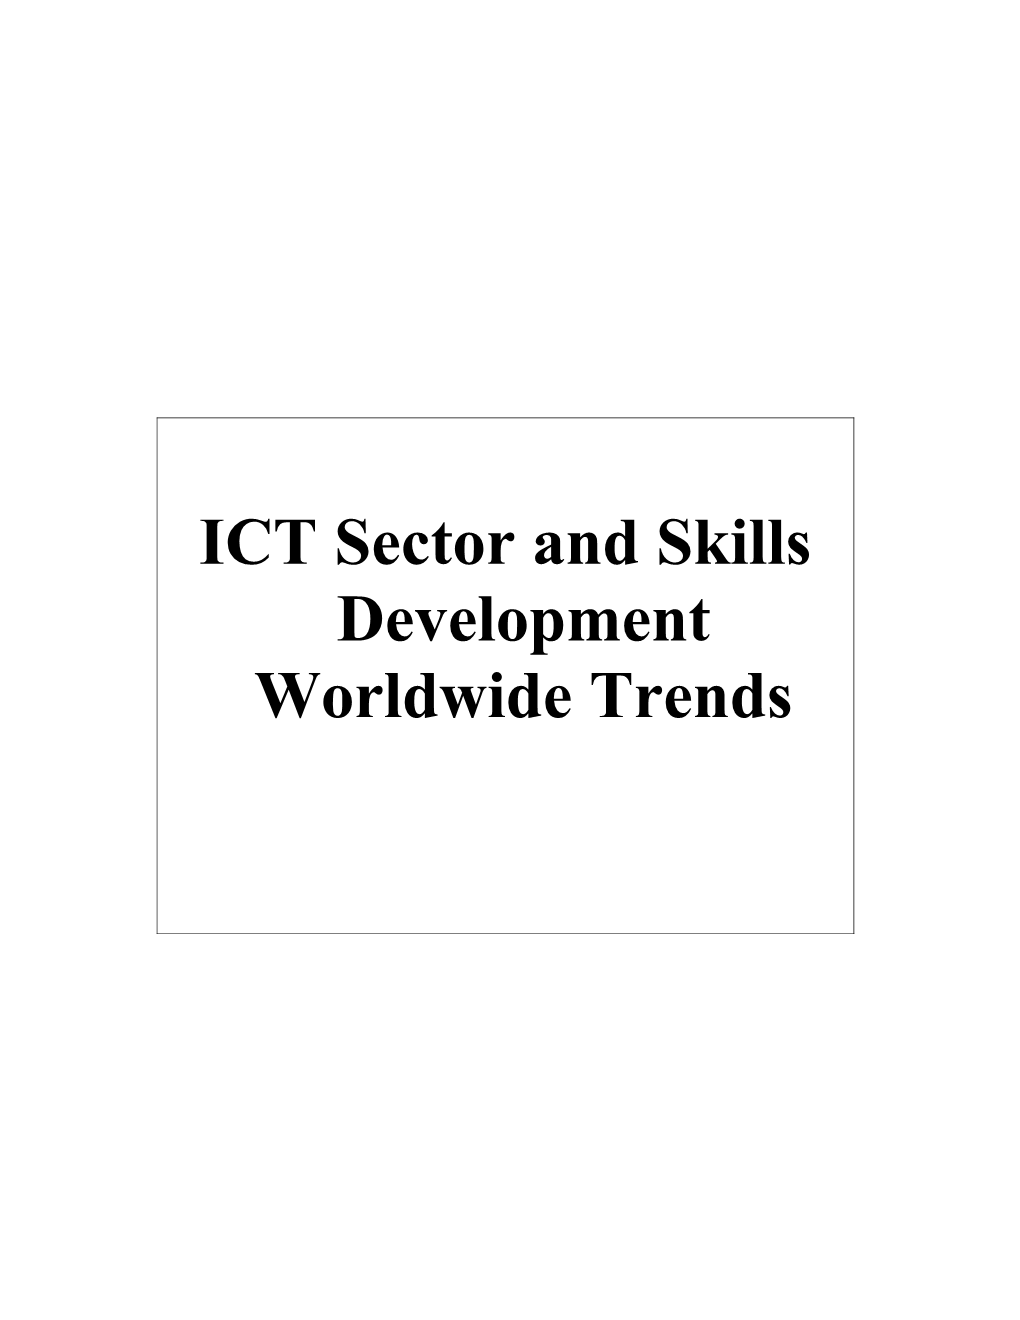 Trends in the ICT Sector (Penny)